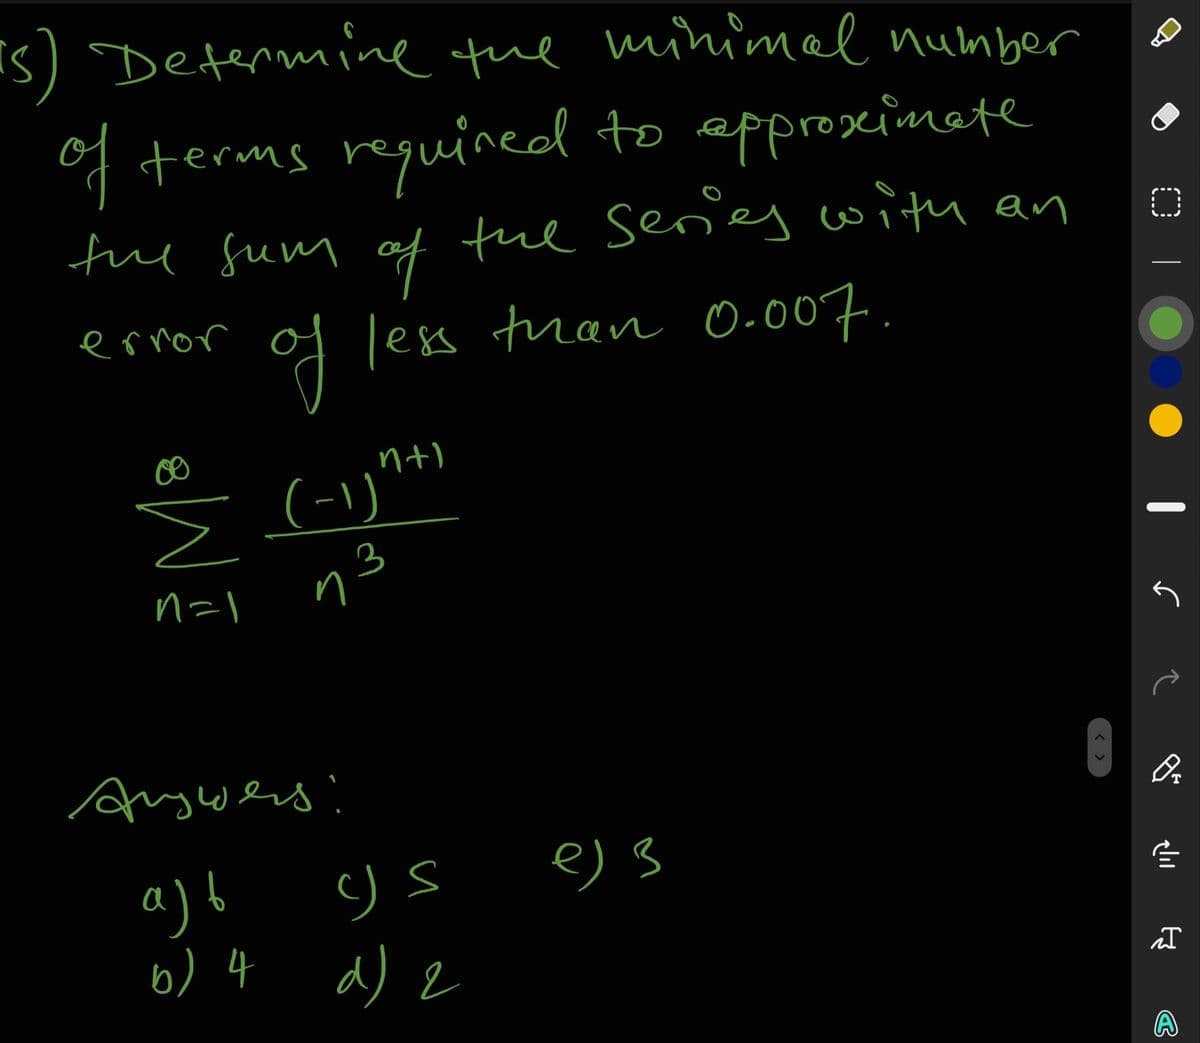 Is) Determine tue minimel number
of terms requined to epproseinete
fue fum of
the seres with an
of less tran 0-007.
ernor
nt)
(-1)"*
n=l
η3
Angwers!
a) b
b) 4 d) 2
e) 3
